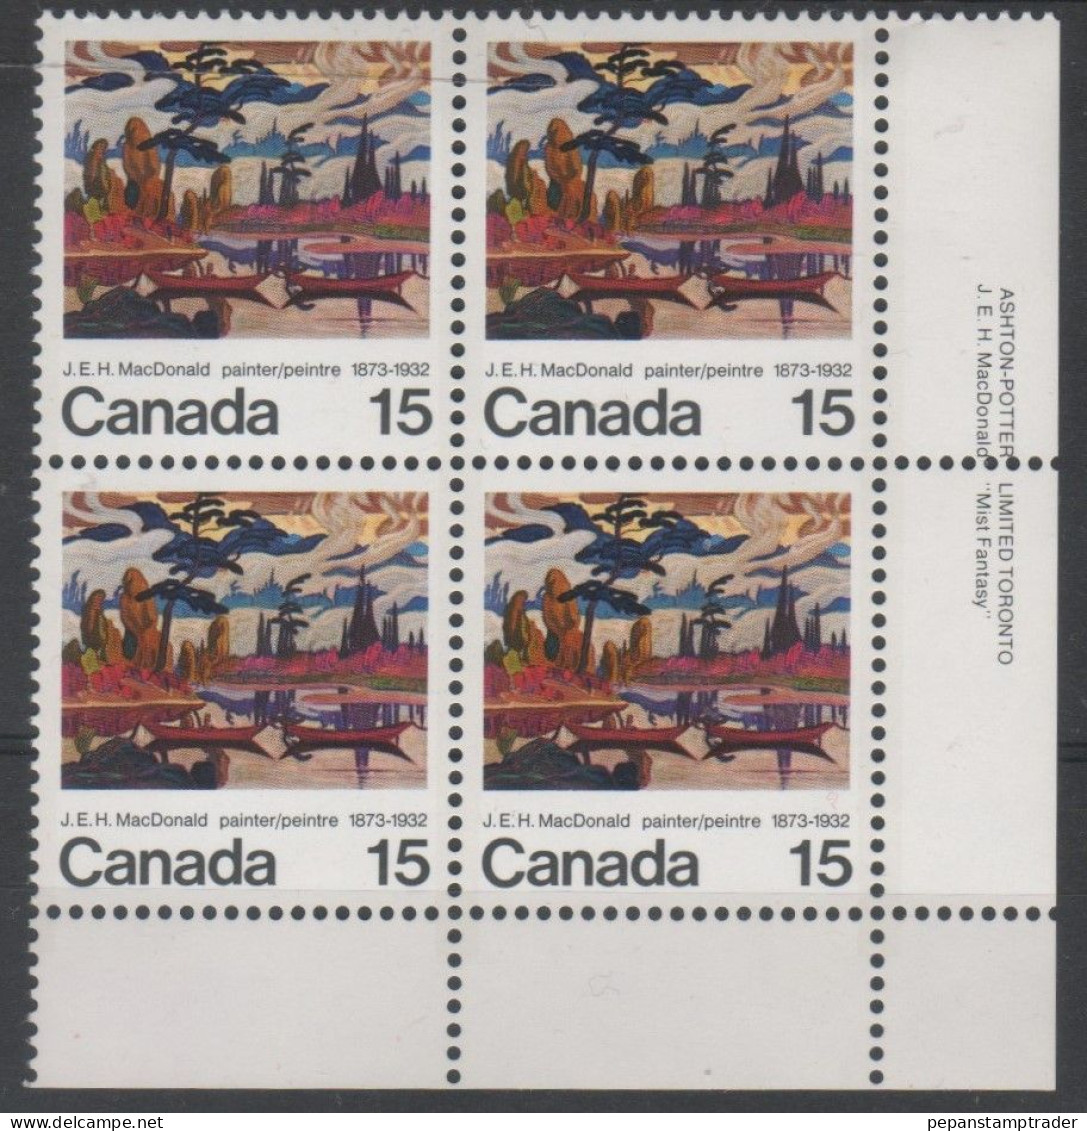 Canada - #617 - MNH PB - Plate Number & Inscriptions